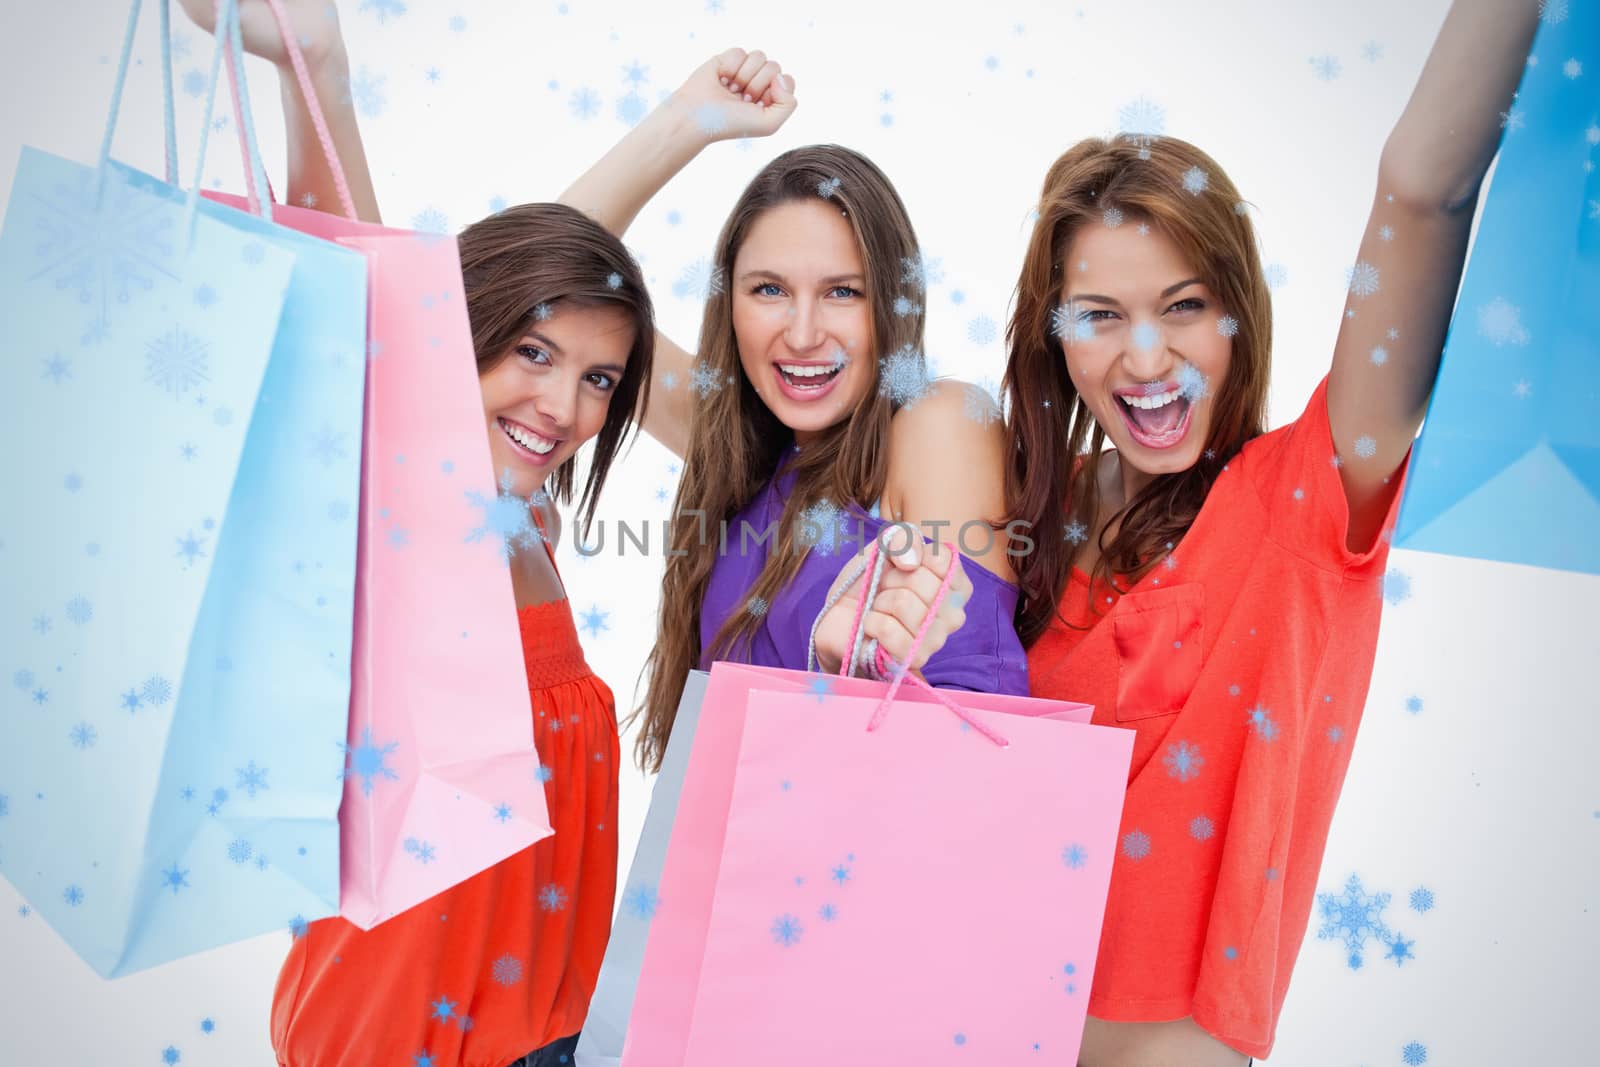 Young women elevating their purchase bags against snow falling